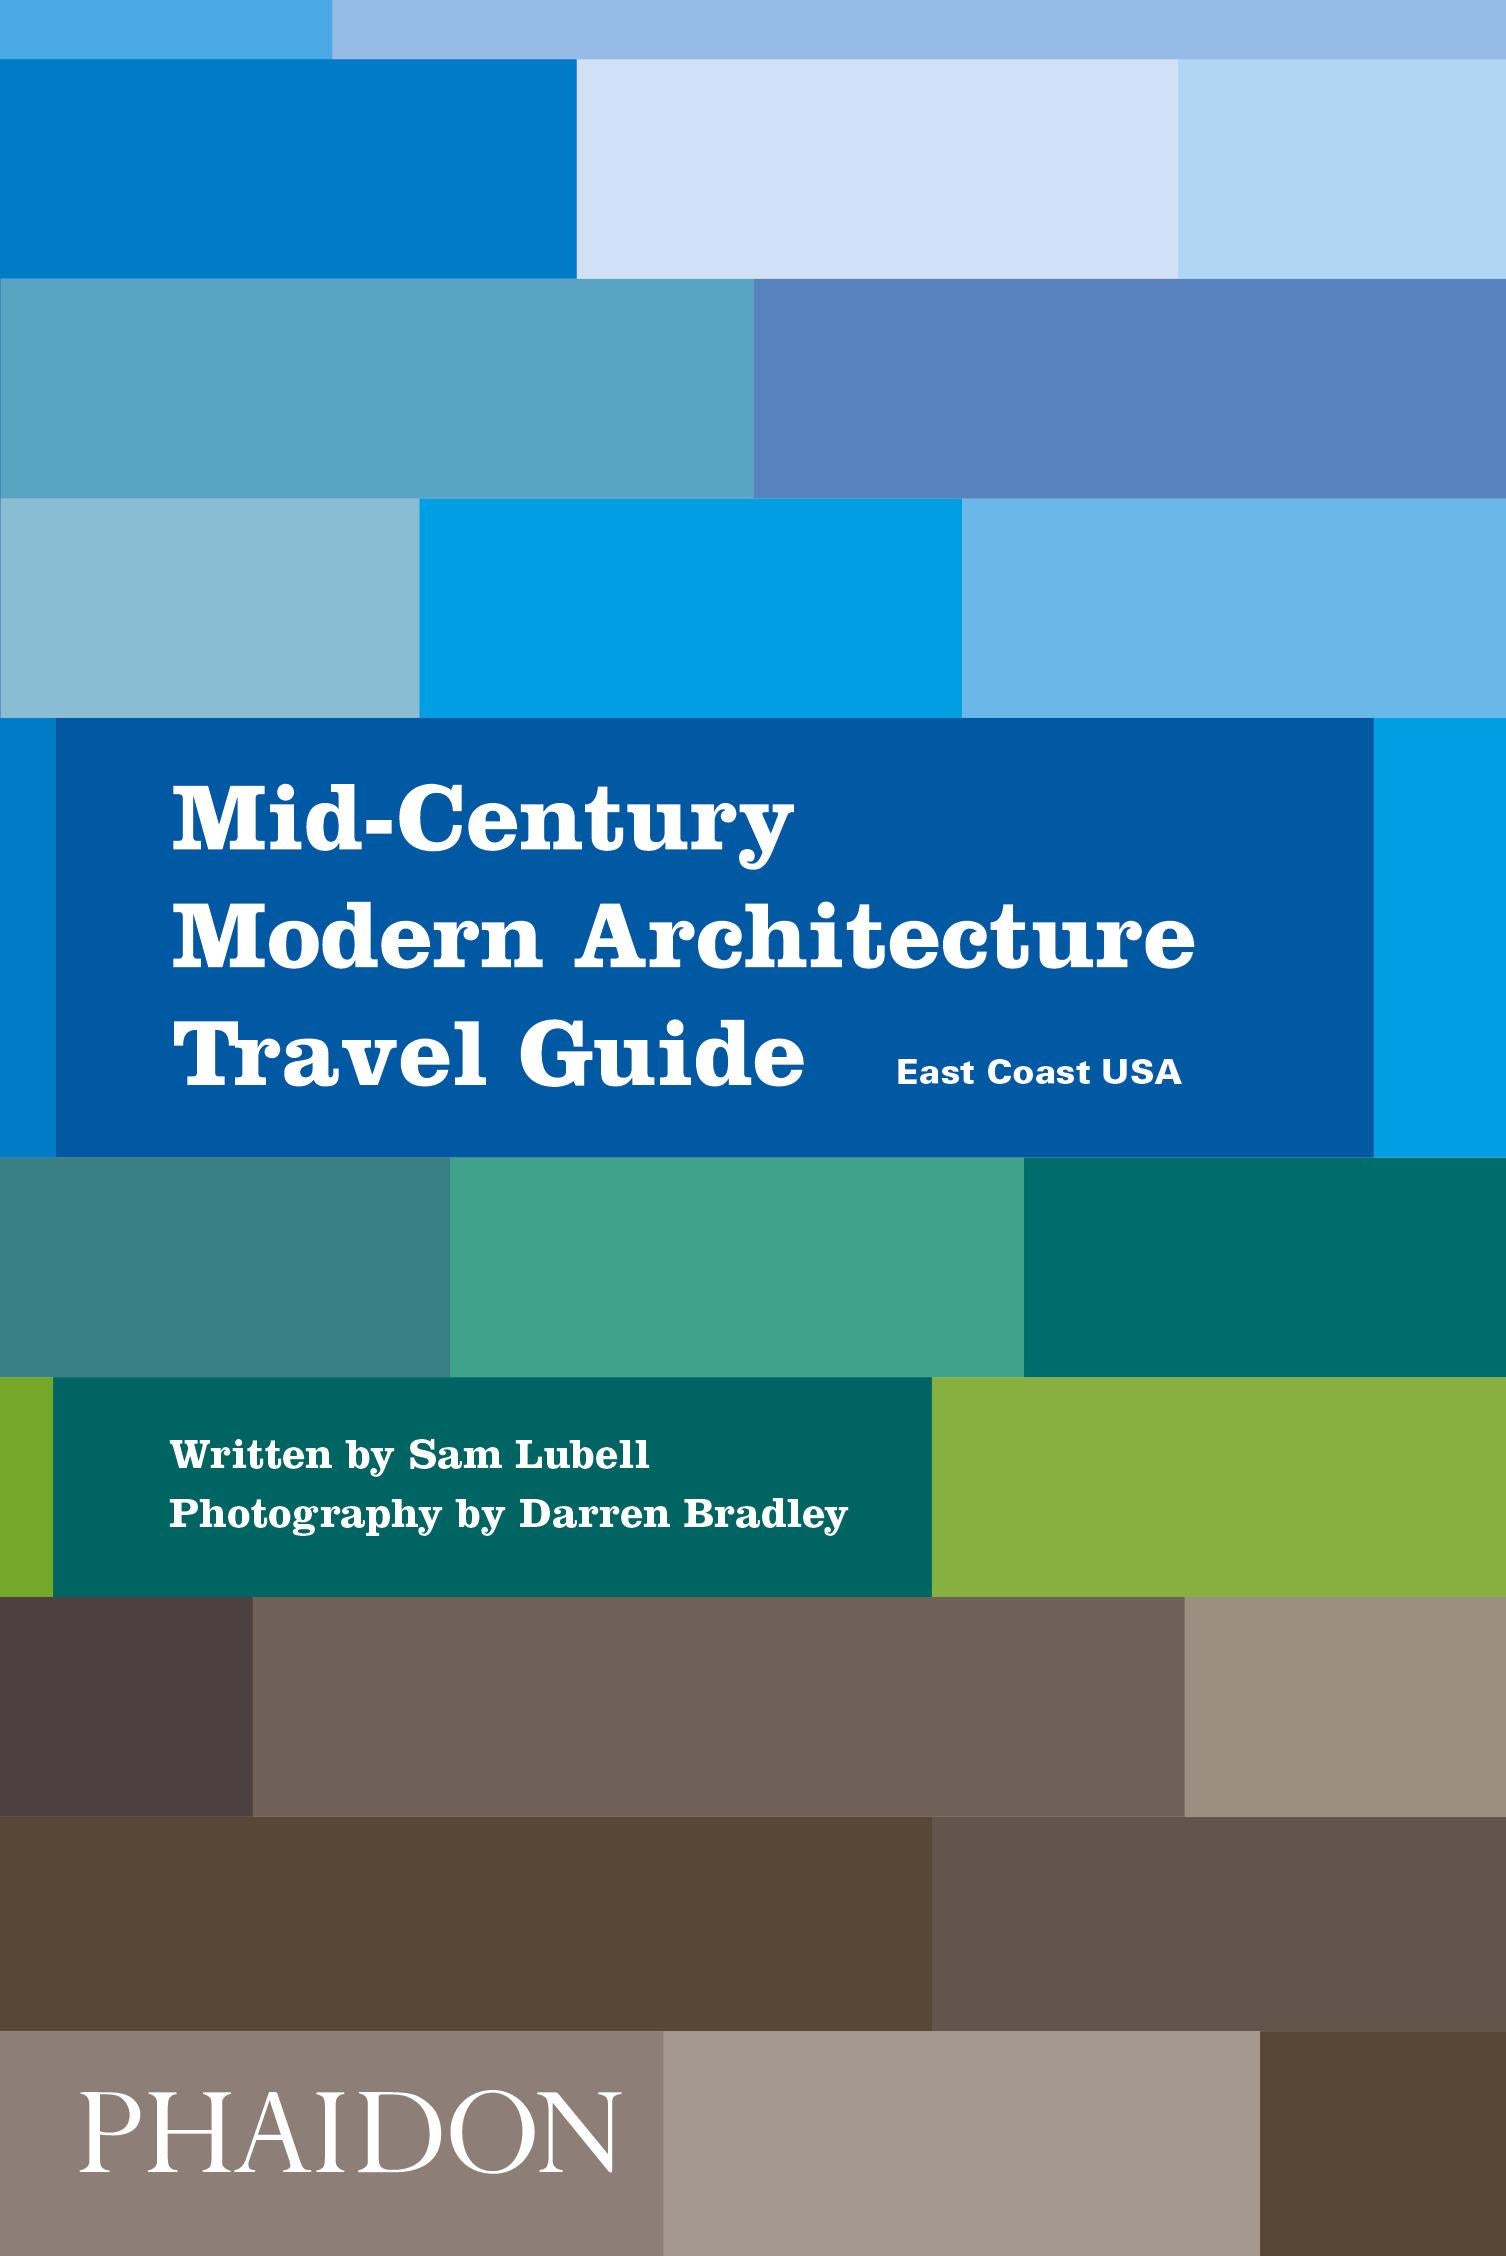 European Mid-Century Modern Architecture Travel Guide East Coast USA For Sale